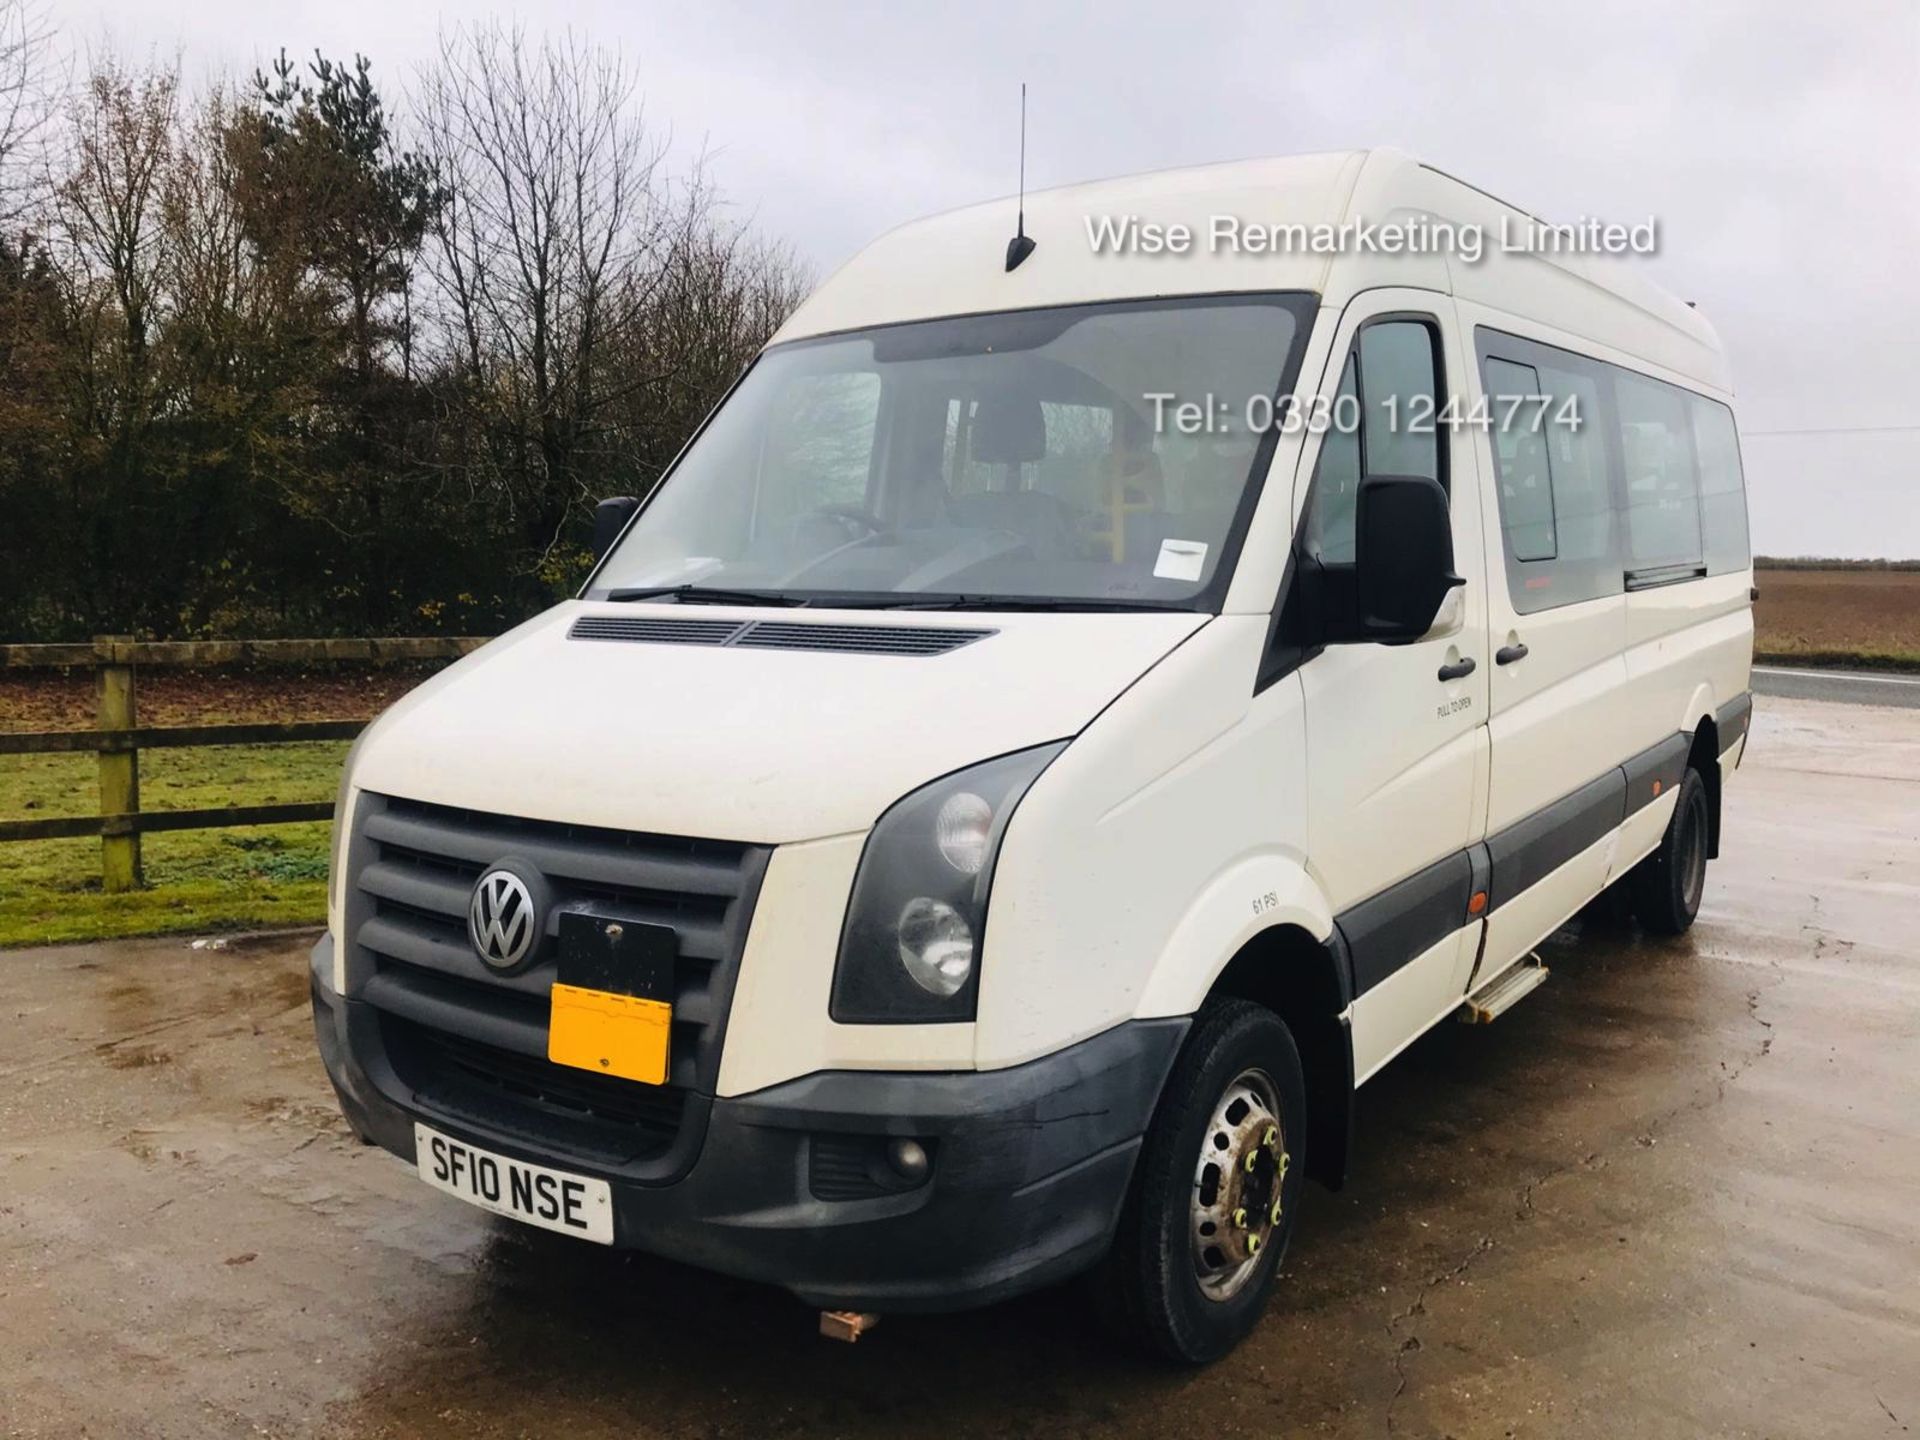 Volkswagen Crafter 16 Seater Mini Bus 2.5 TDI Auto - LWB - 2010 10 Reg - 1 Keeper From New - - Image 2 of 15